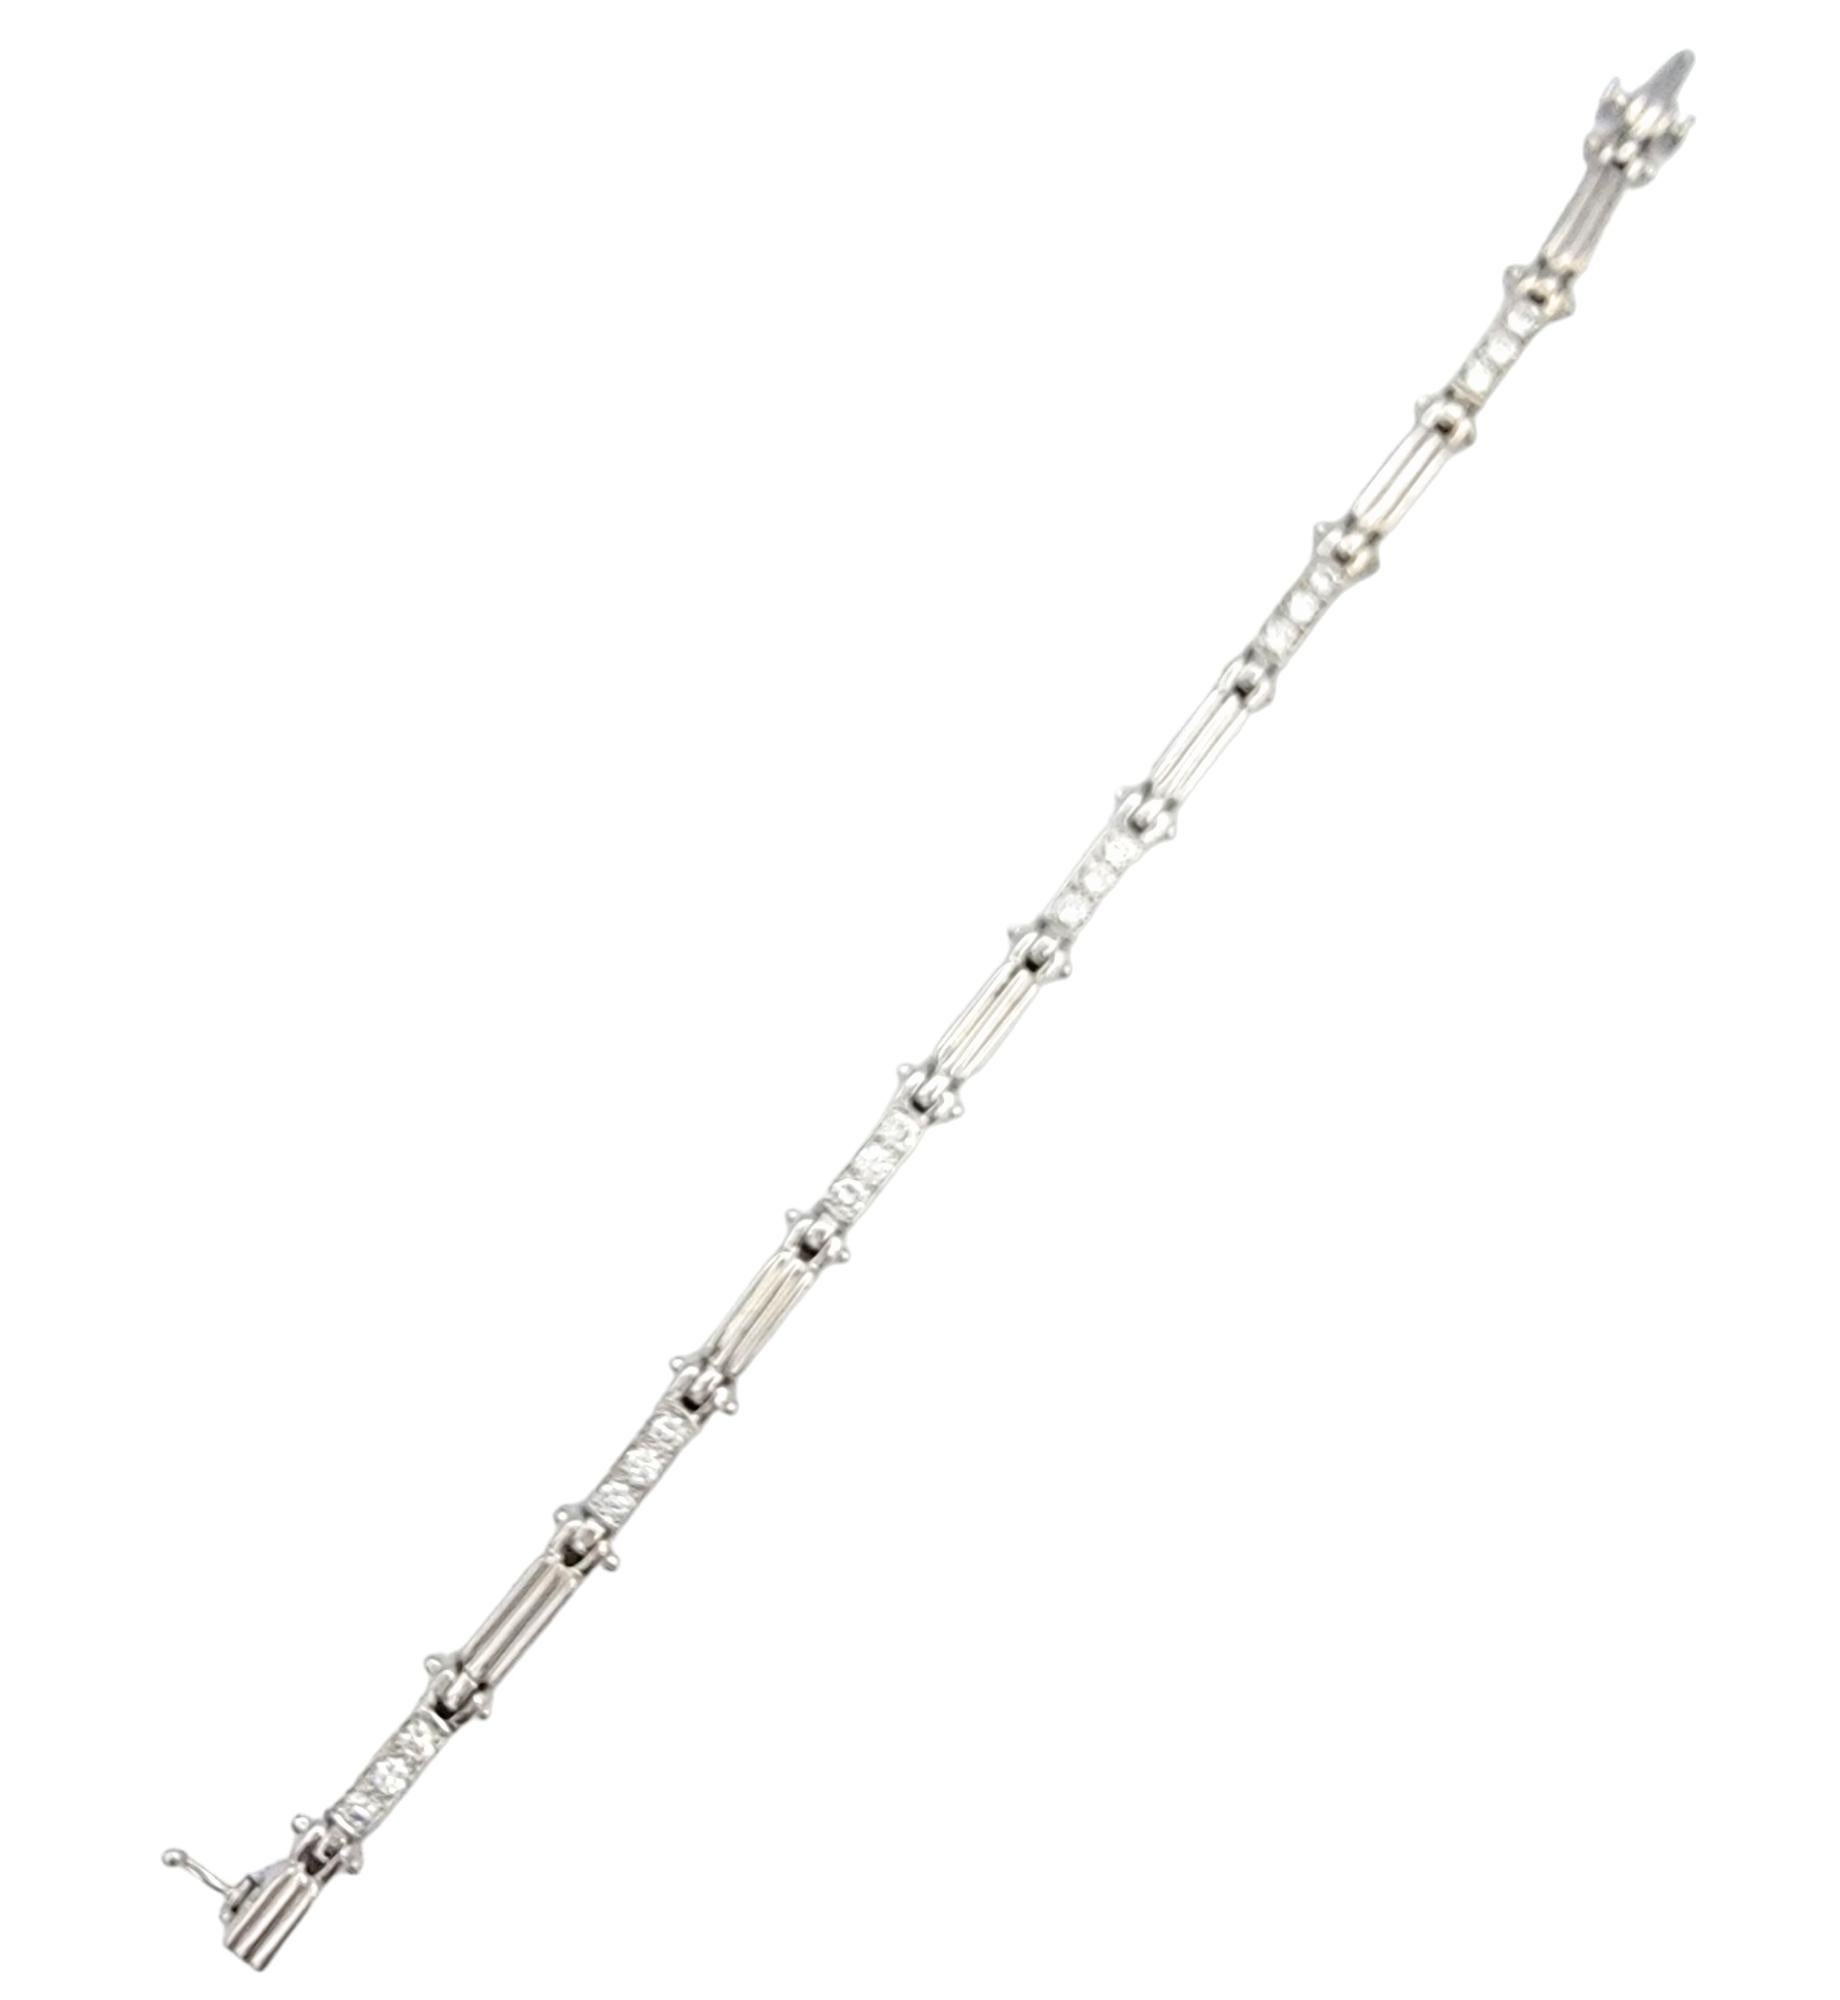 This exquisite 14 karat white gold link bracelet is a true testament to elegance and sophistication. Its alternating link design, with three dazzling round diamonds set on one link and a beautifully ridged pattern on the next, creates a captivating